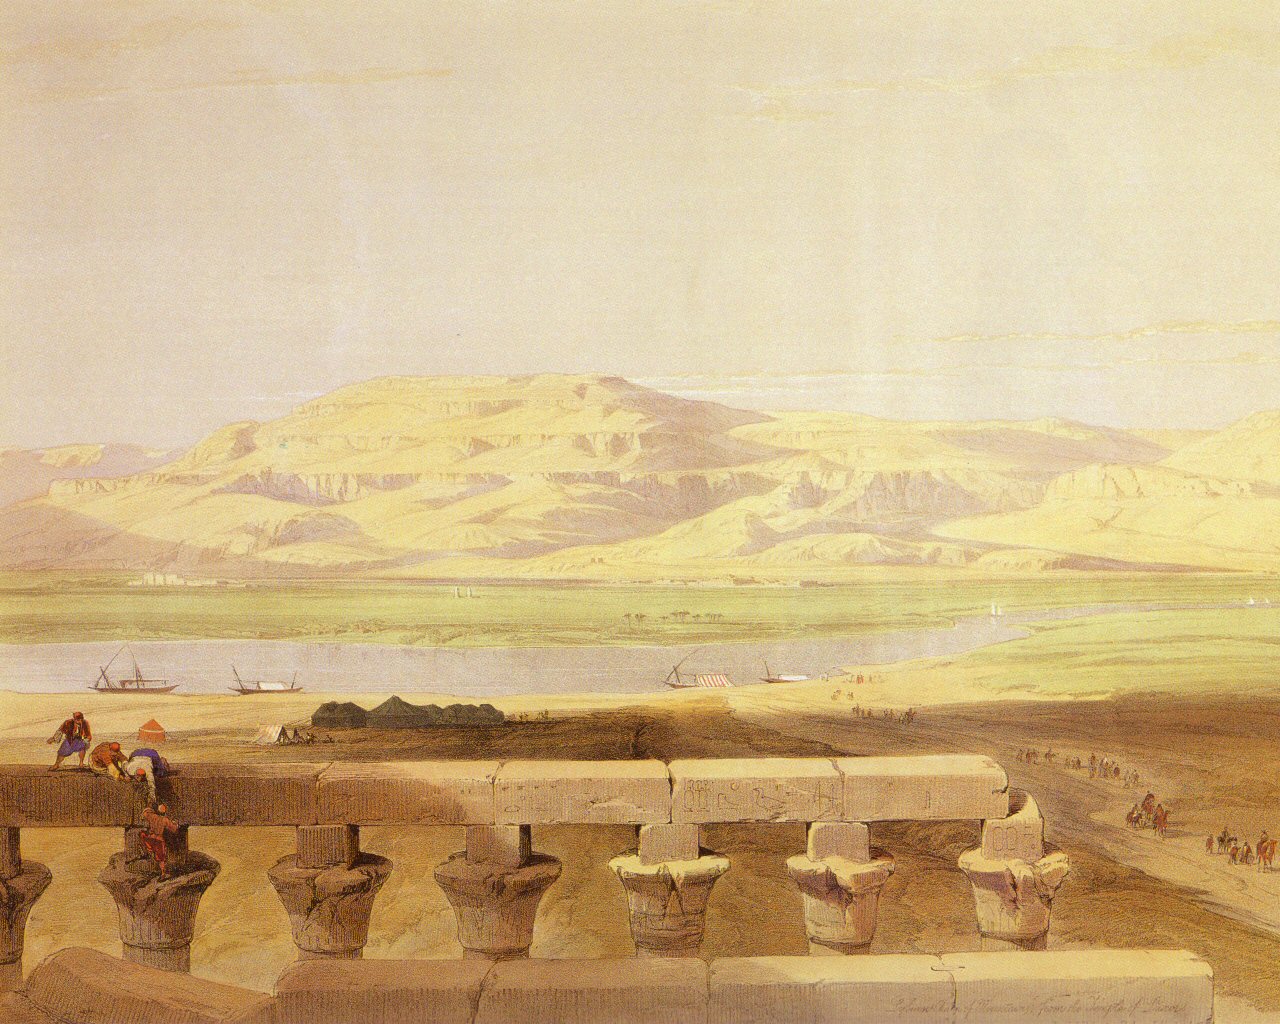 David_Roberts_20_The_Western_Banks_Of_The_Nile_Seen_From_Luxor_1280x1024.jpg